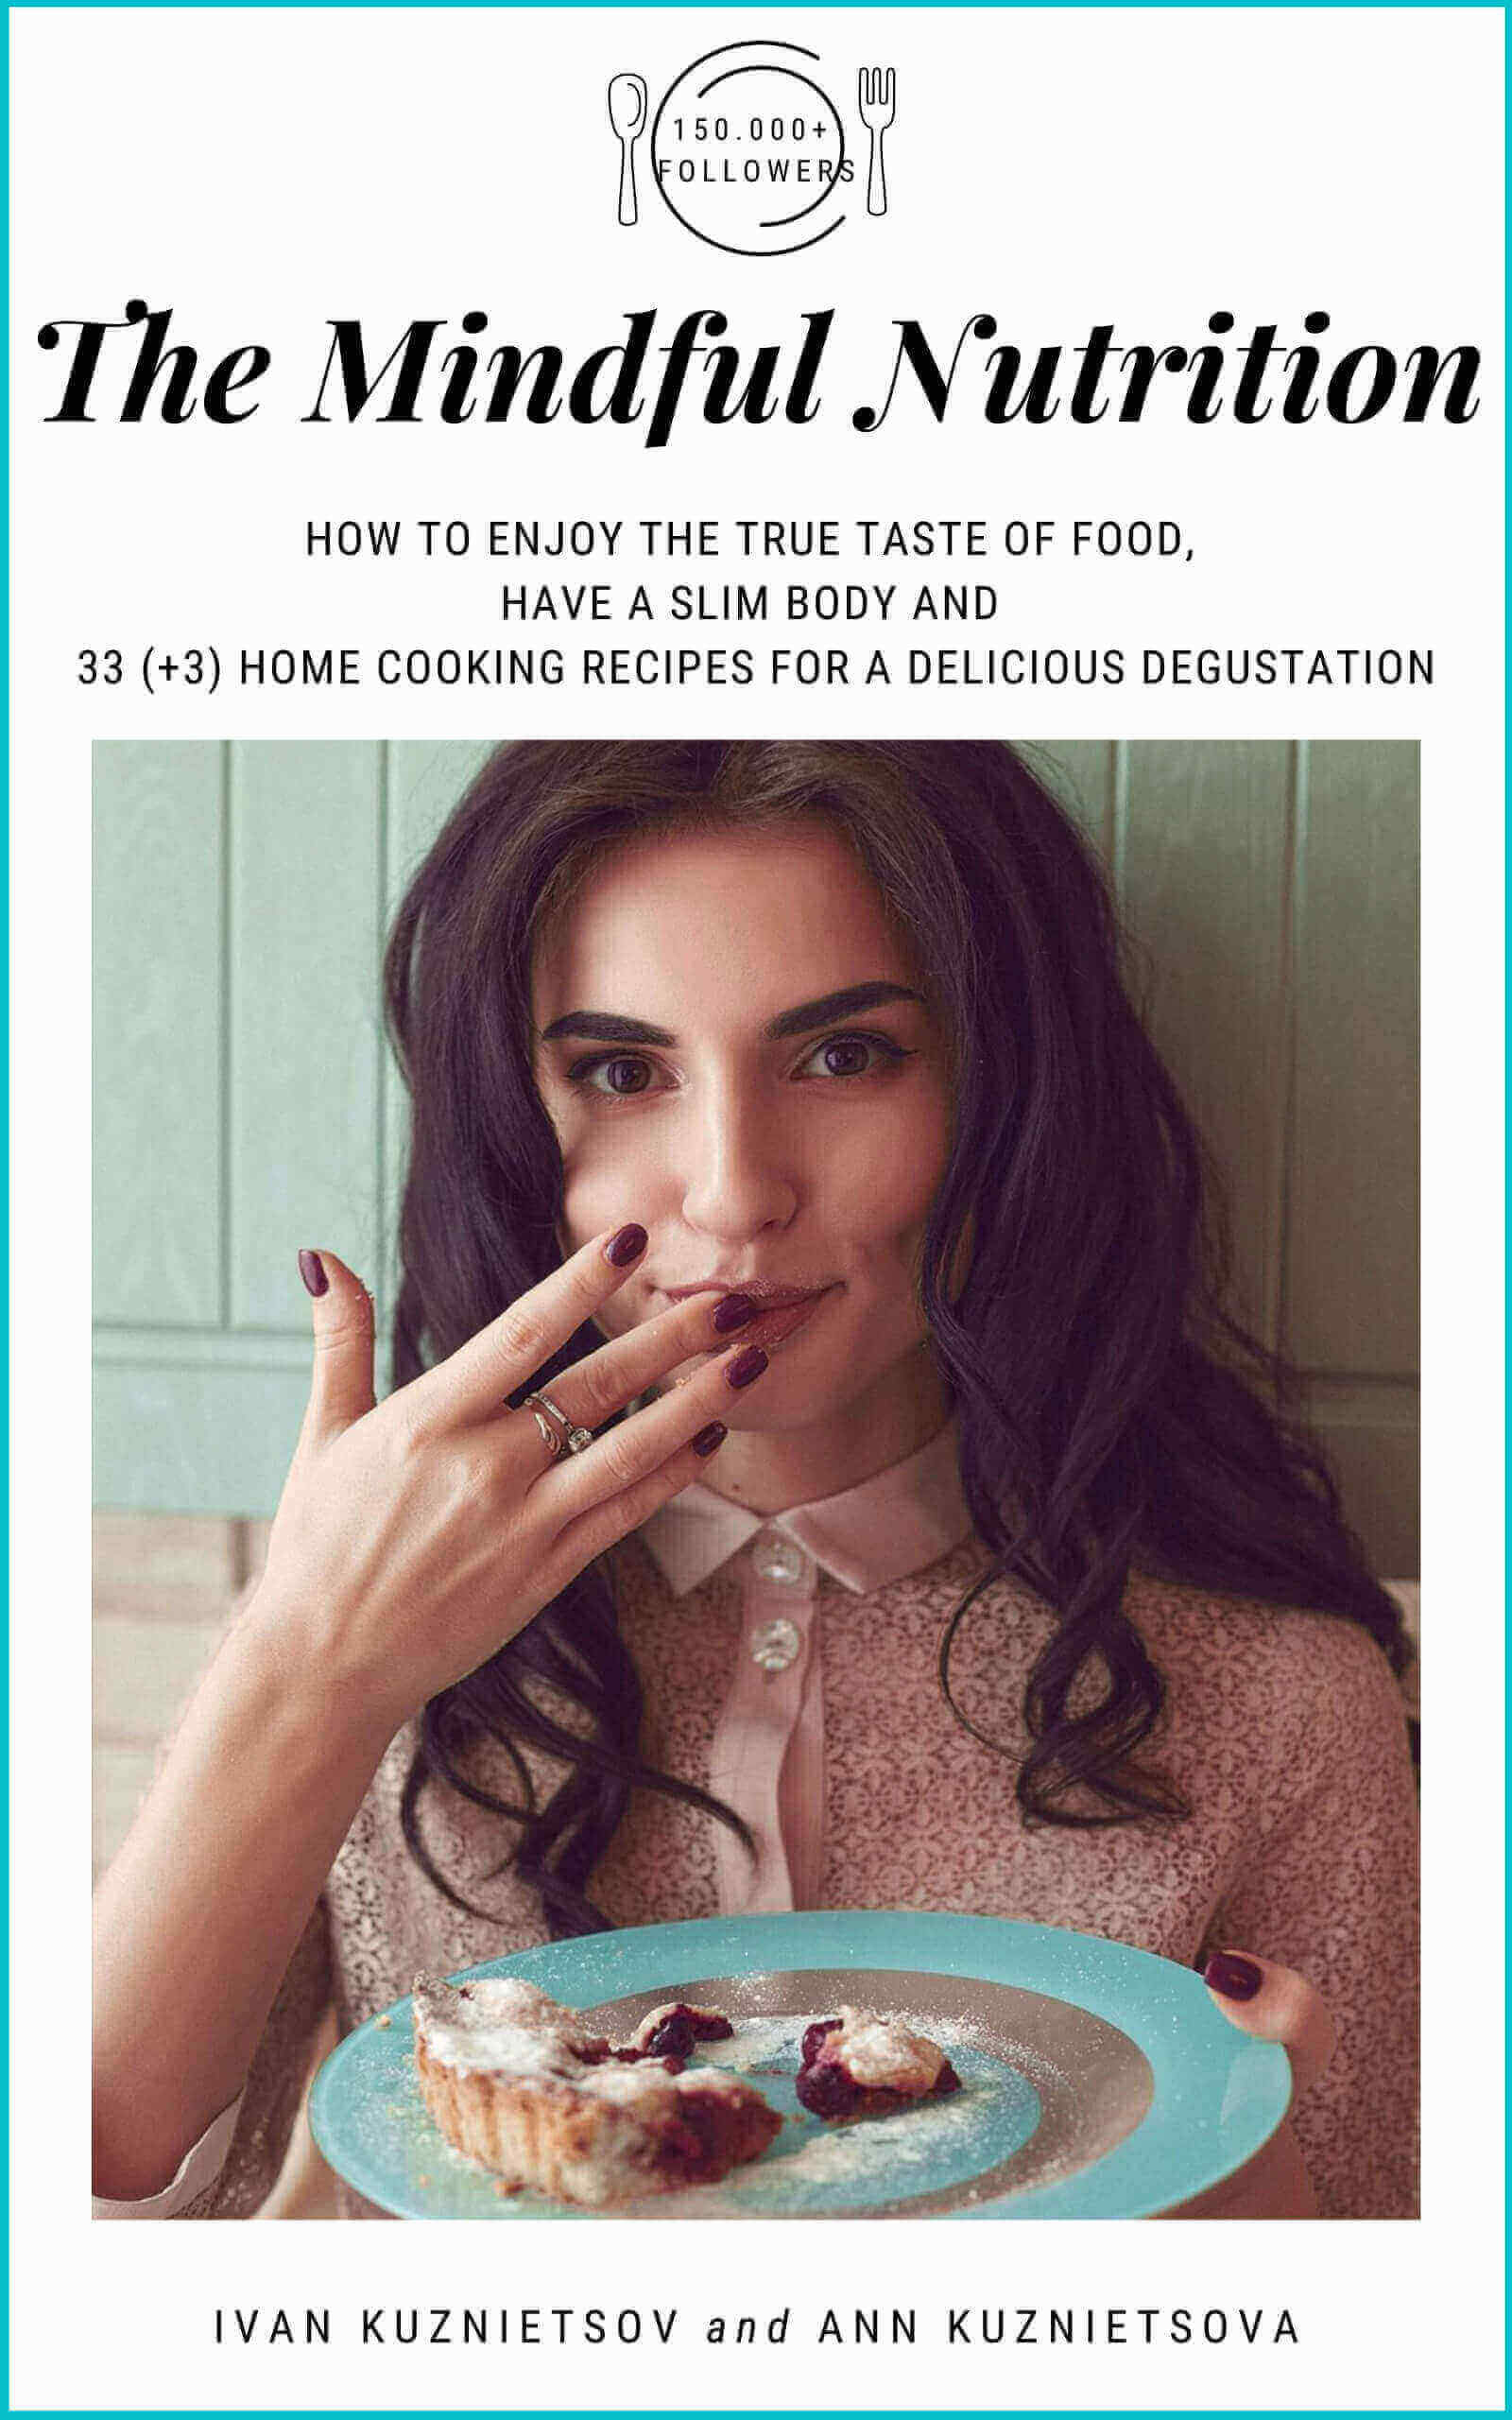 FREE: The Mindful Nutrition: How to Enjoy the True Taste of Food, Have a Slim Body and 33 (+3) Home Cooking Recipes for a Delicious Degustation by Ivan Kuznietsov